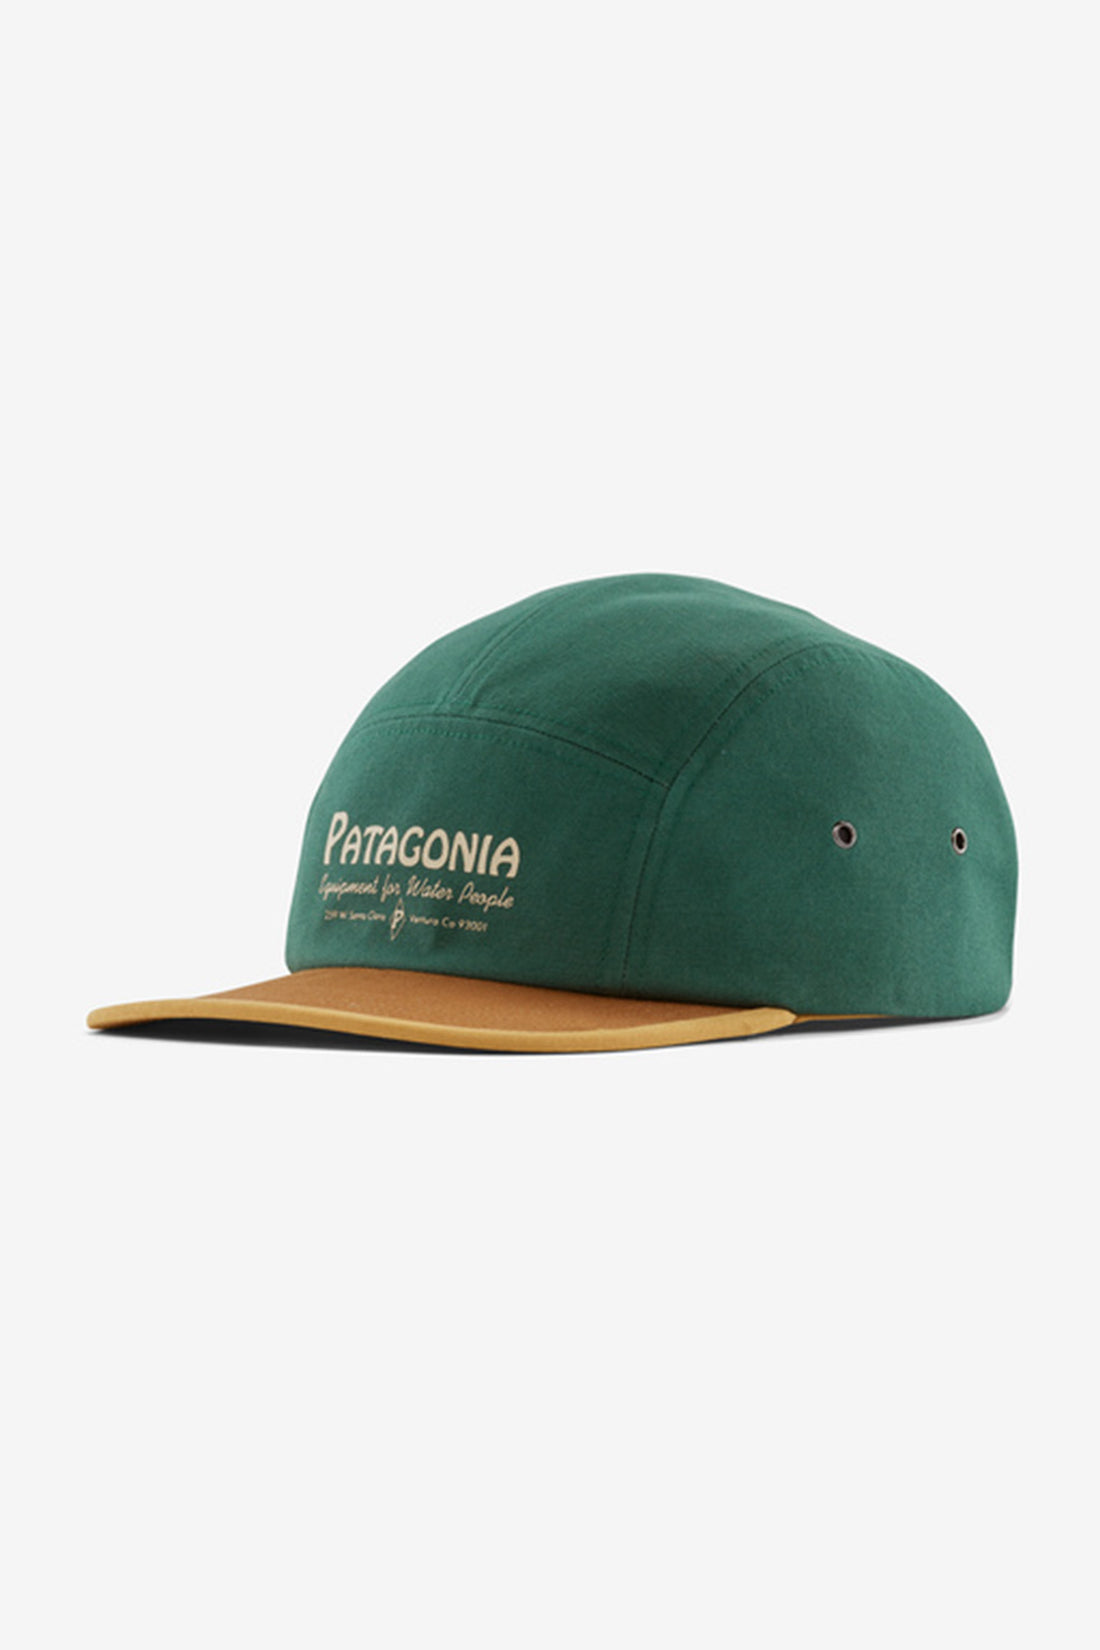 PATAGONIA GRAPHIC MACLURE HAT - WATER PEOPLE BANNER: CONIFER GREEN HAT PATAGONIA   